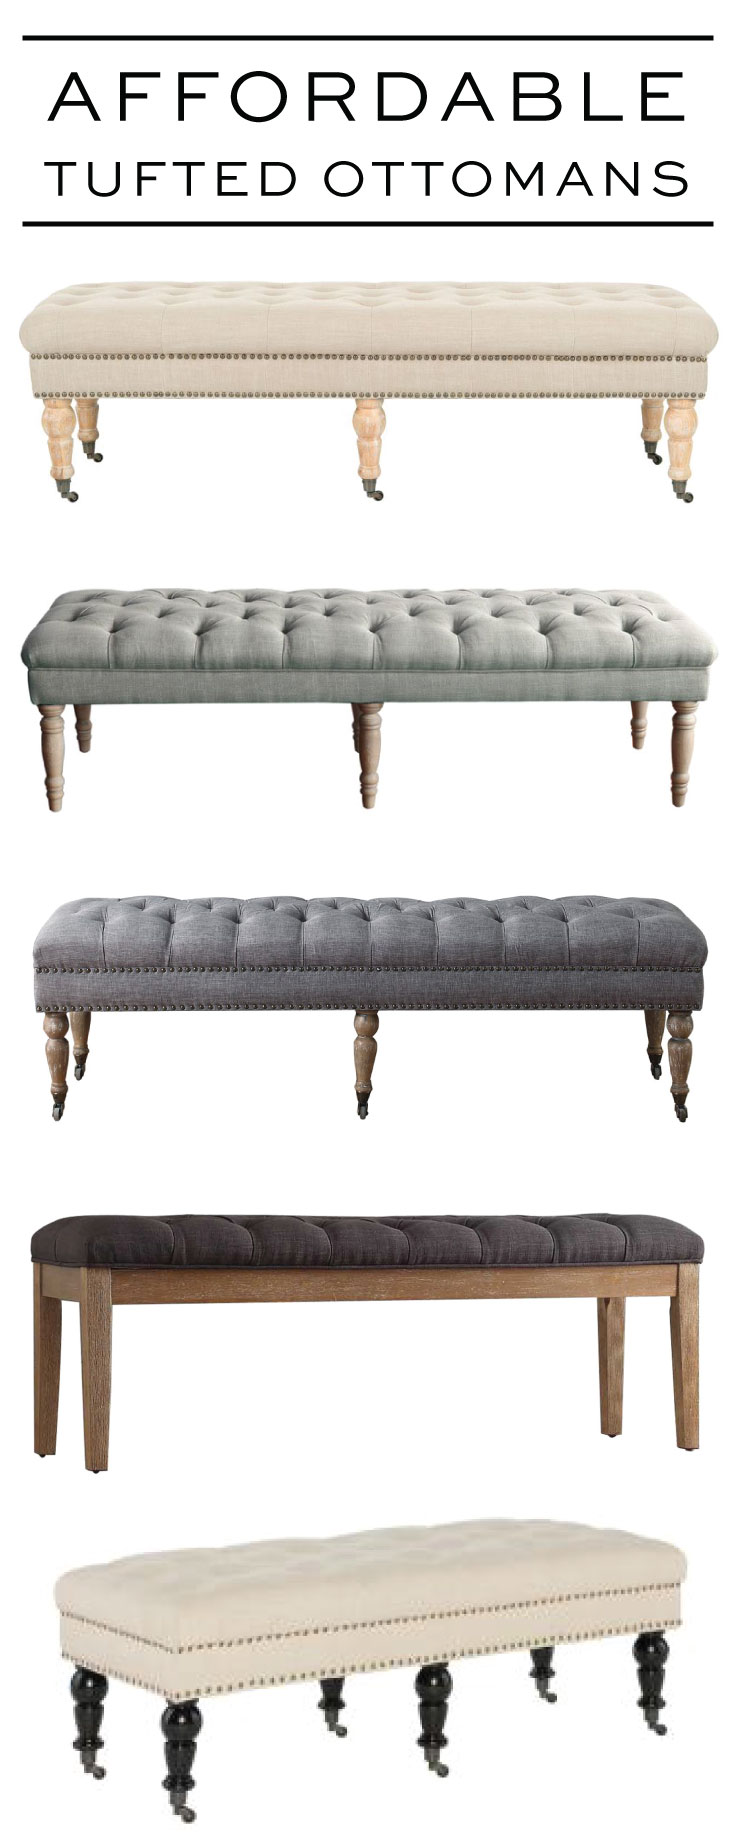 Affordable Tufted Ottomans